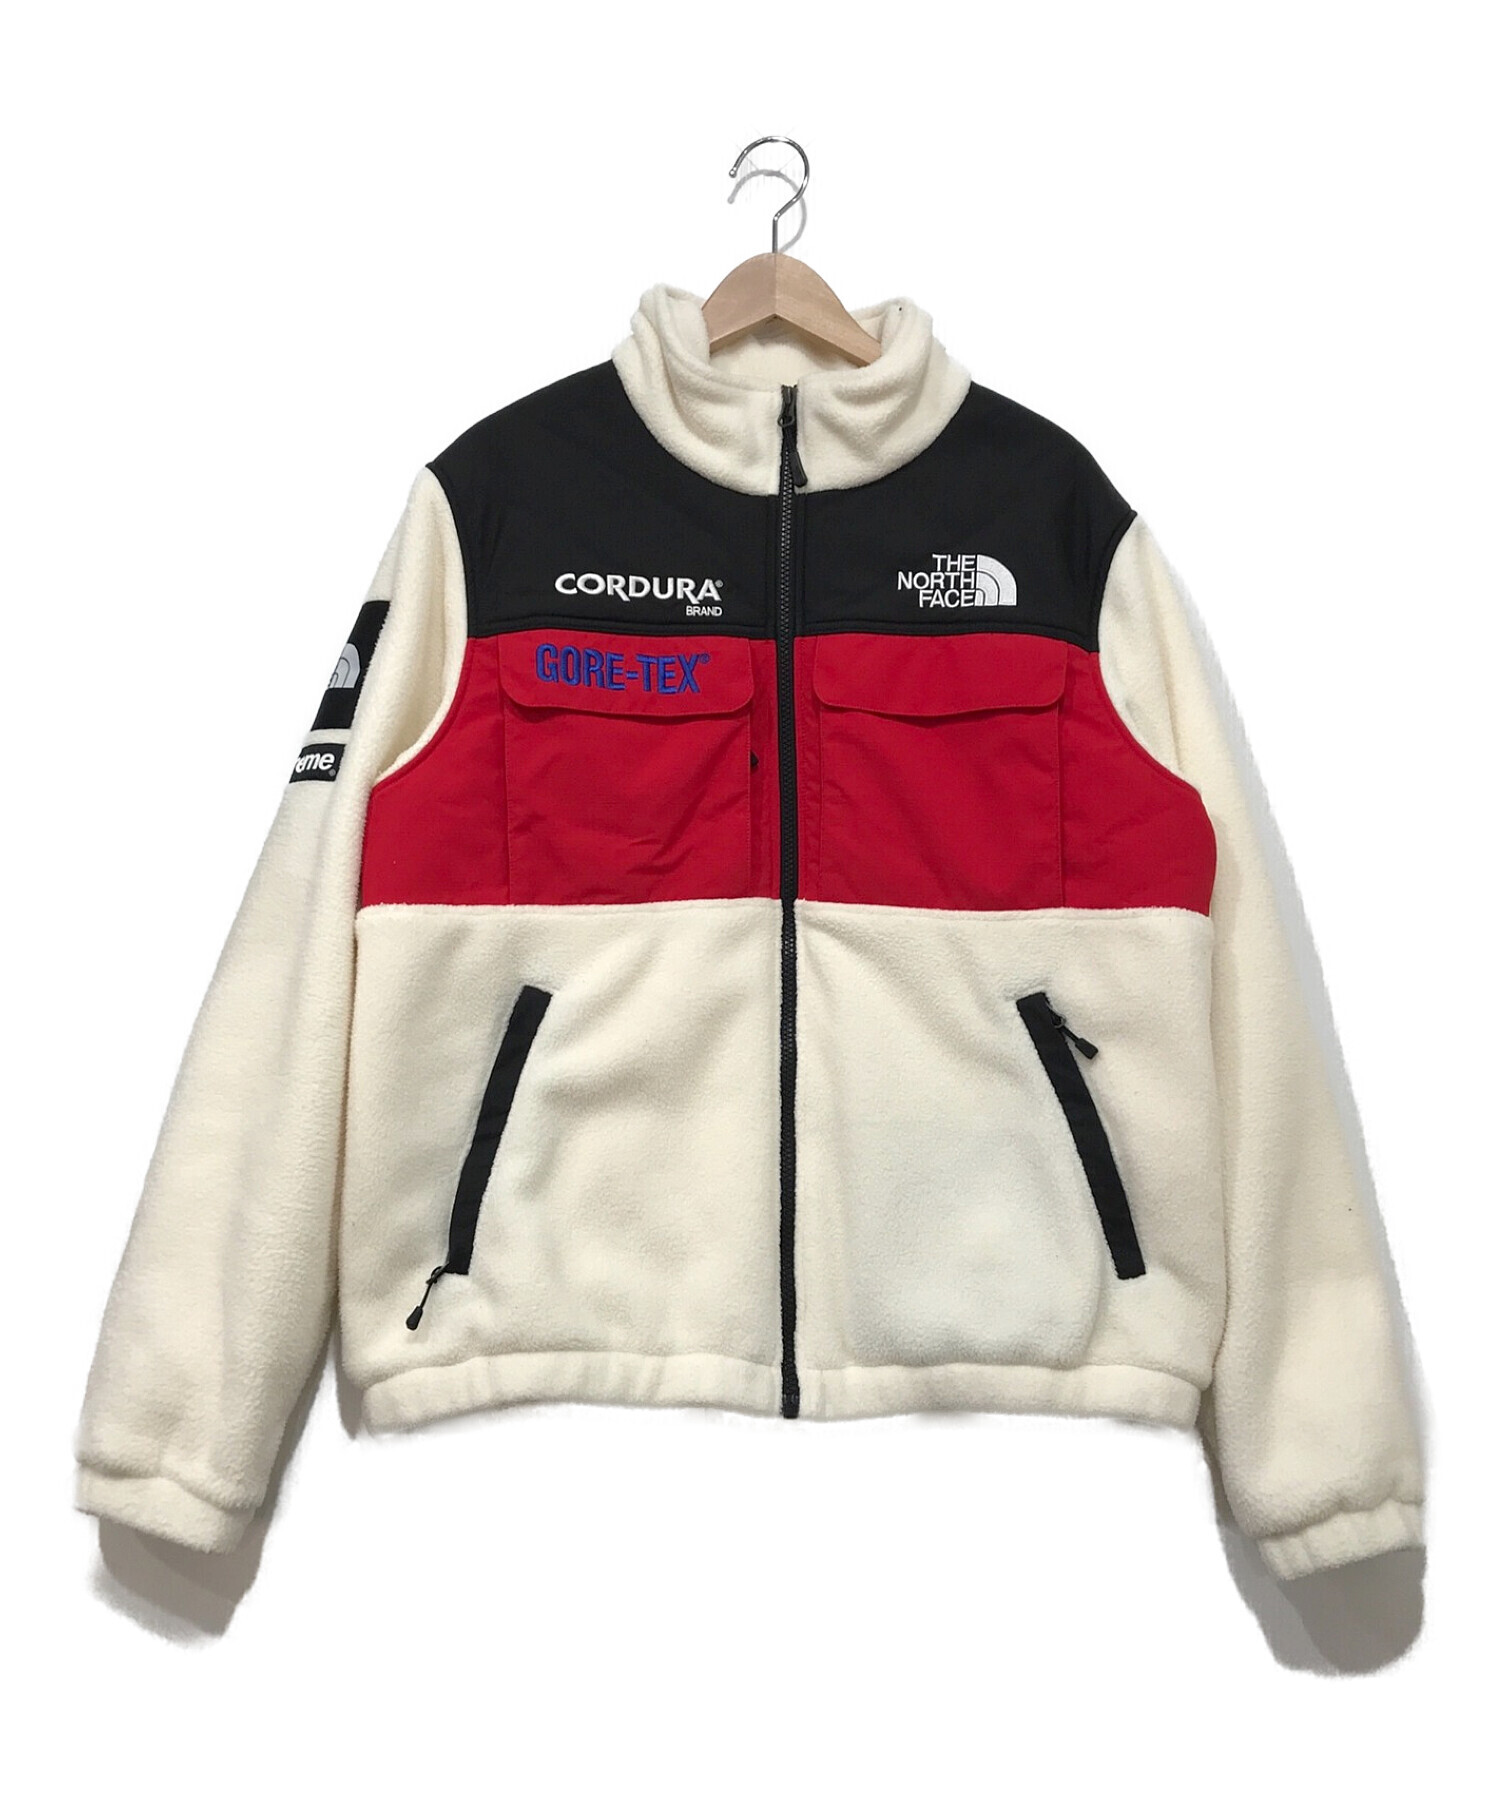 Black黒サイズSupreme The North Face Expedition Fleece